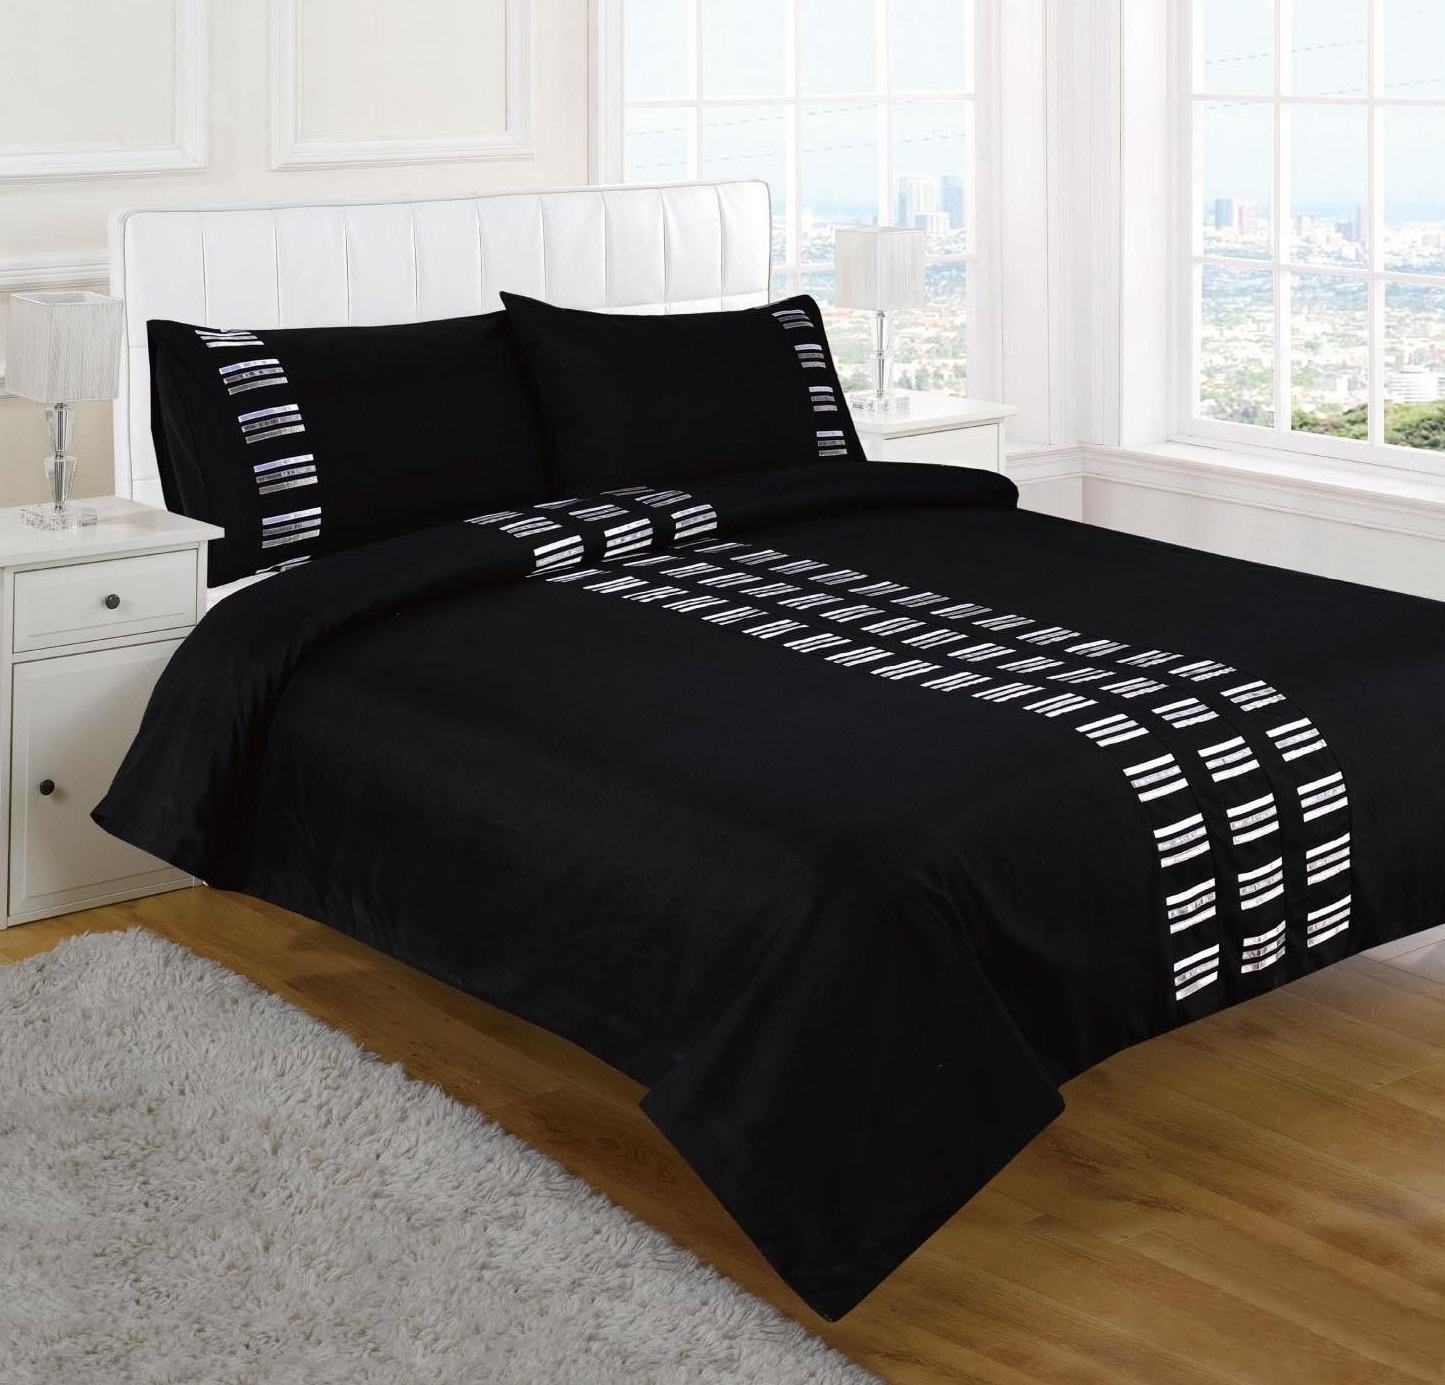 Black And Covers Terrific Black And White Duvet Covers In Renzo Cushion Cover Black Installed With White Nightstand And White Table Lamp On Wooden Floor  Cozy Black And White Duvet Covers Collection For Comfortable Bedrooms